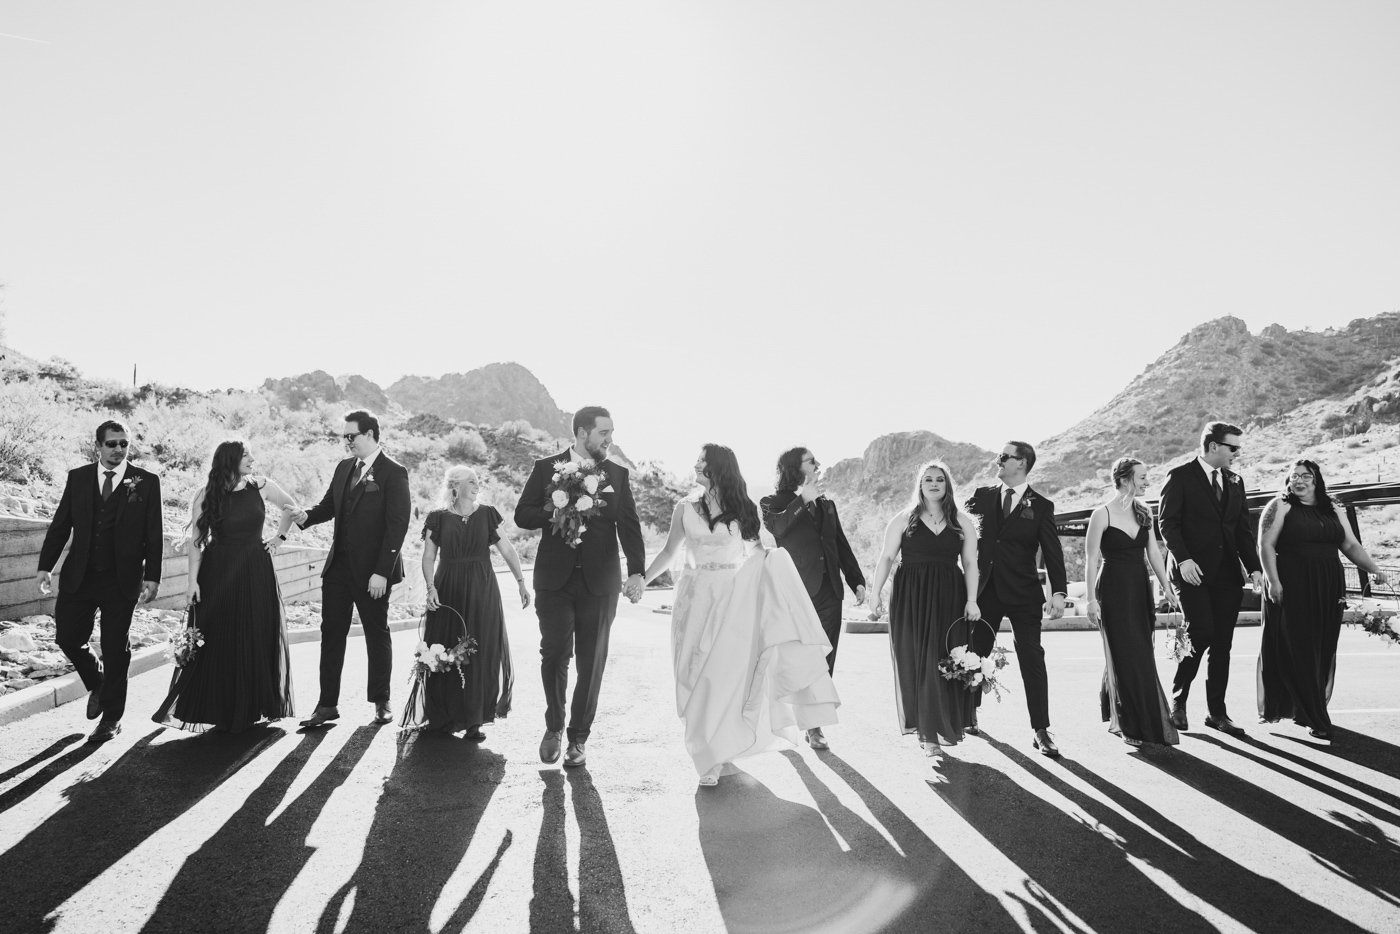 wedding party walking near mountains in black and white